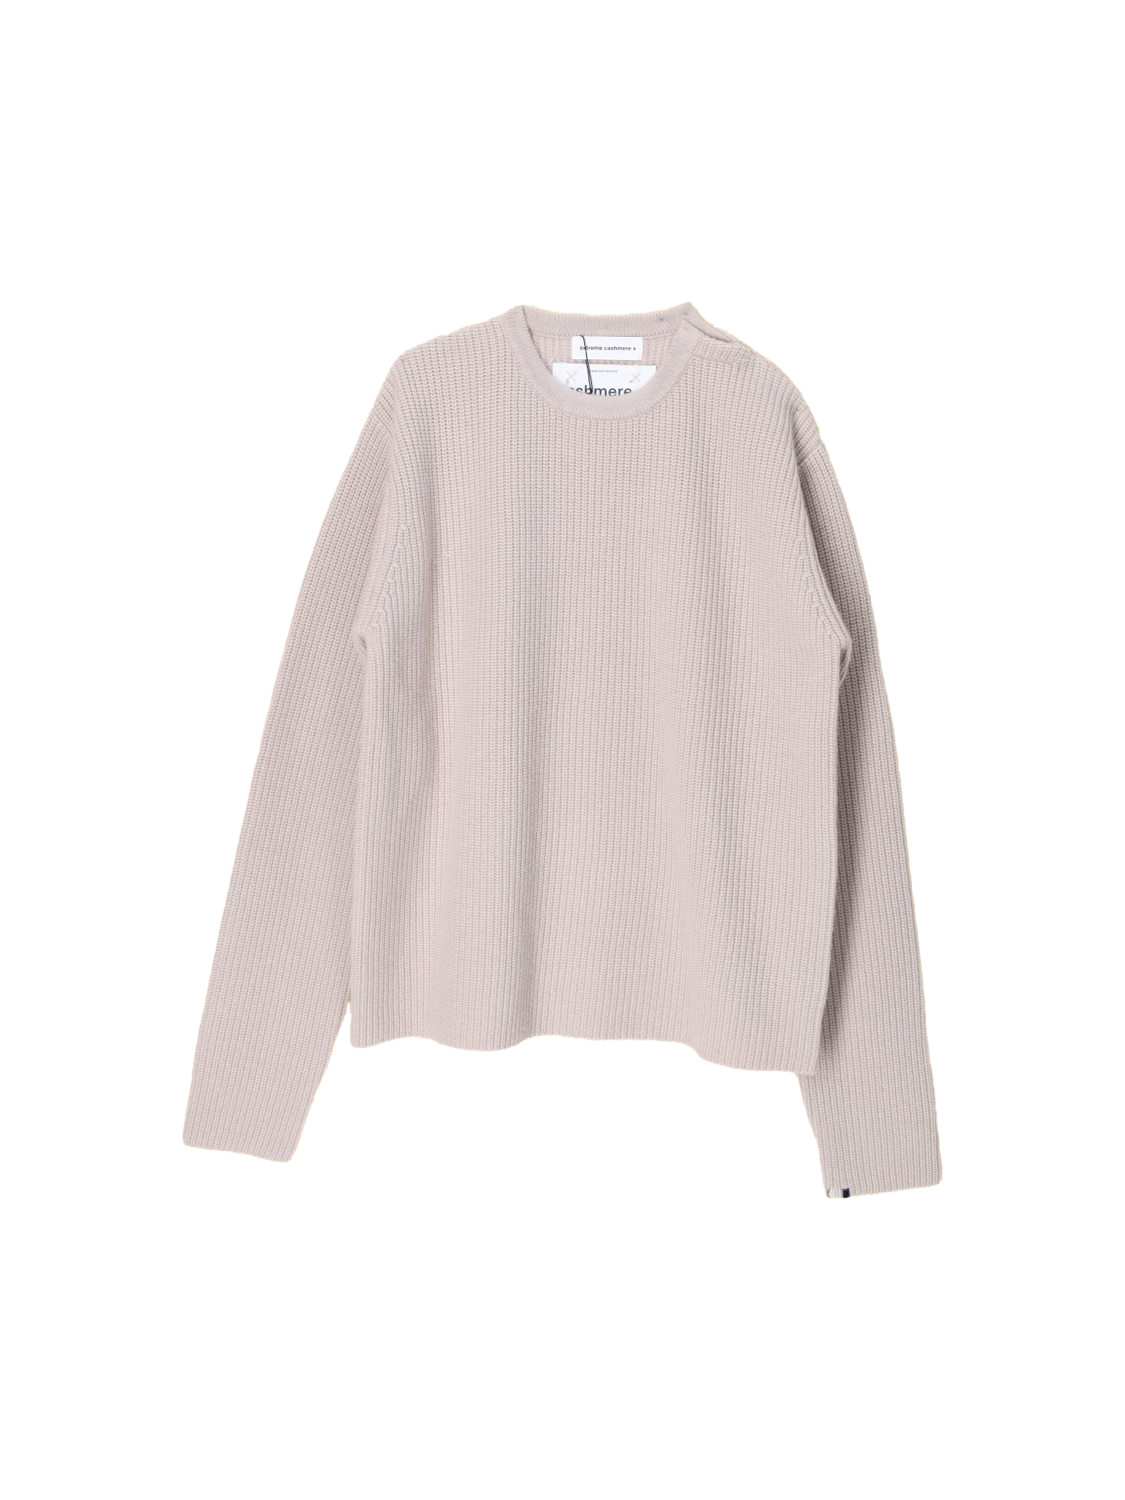 N°356 You – Oversized cashmere sweater 